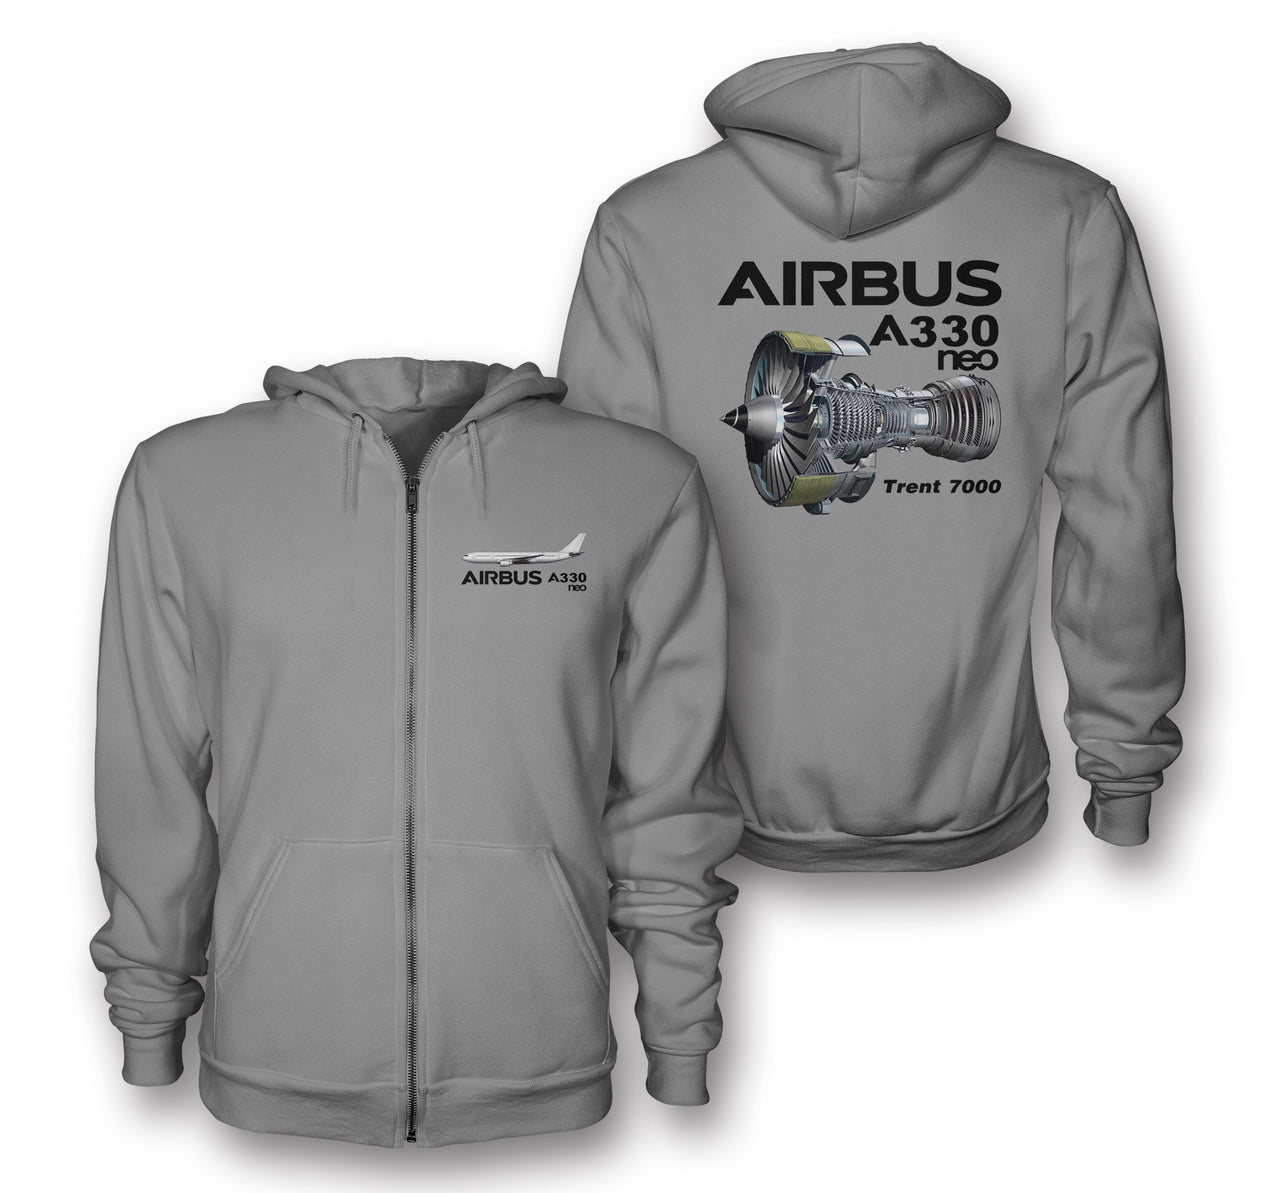 The Airbus A330neo & Trent 7000 Engine Designed Zipped Hoodies